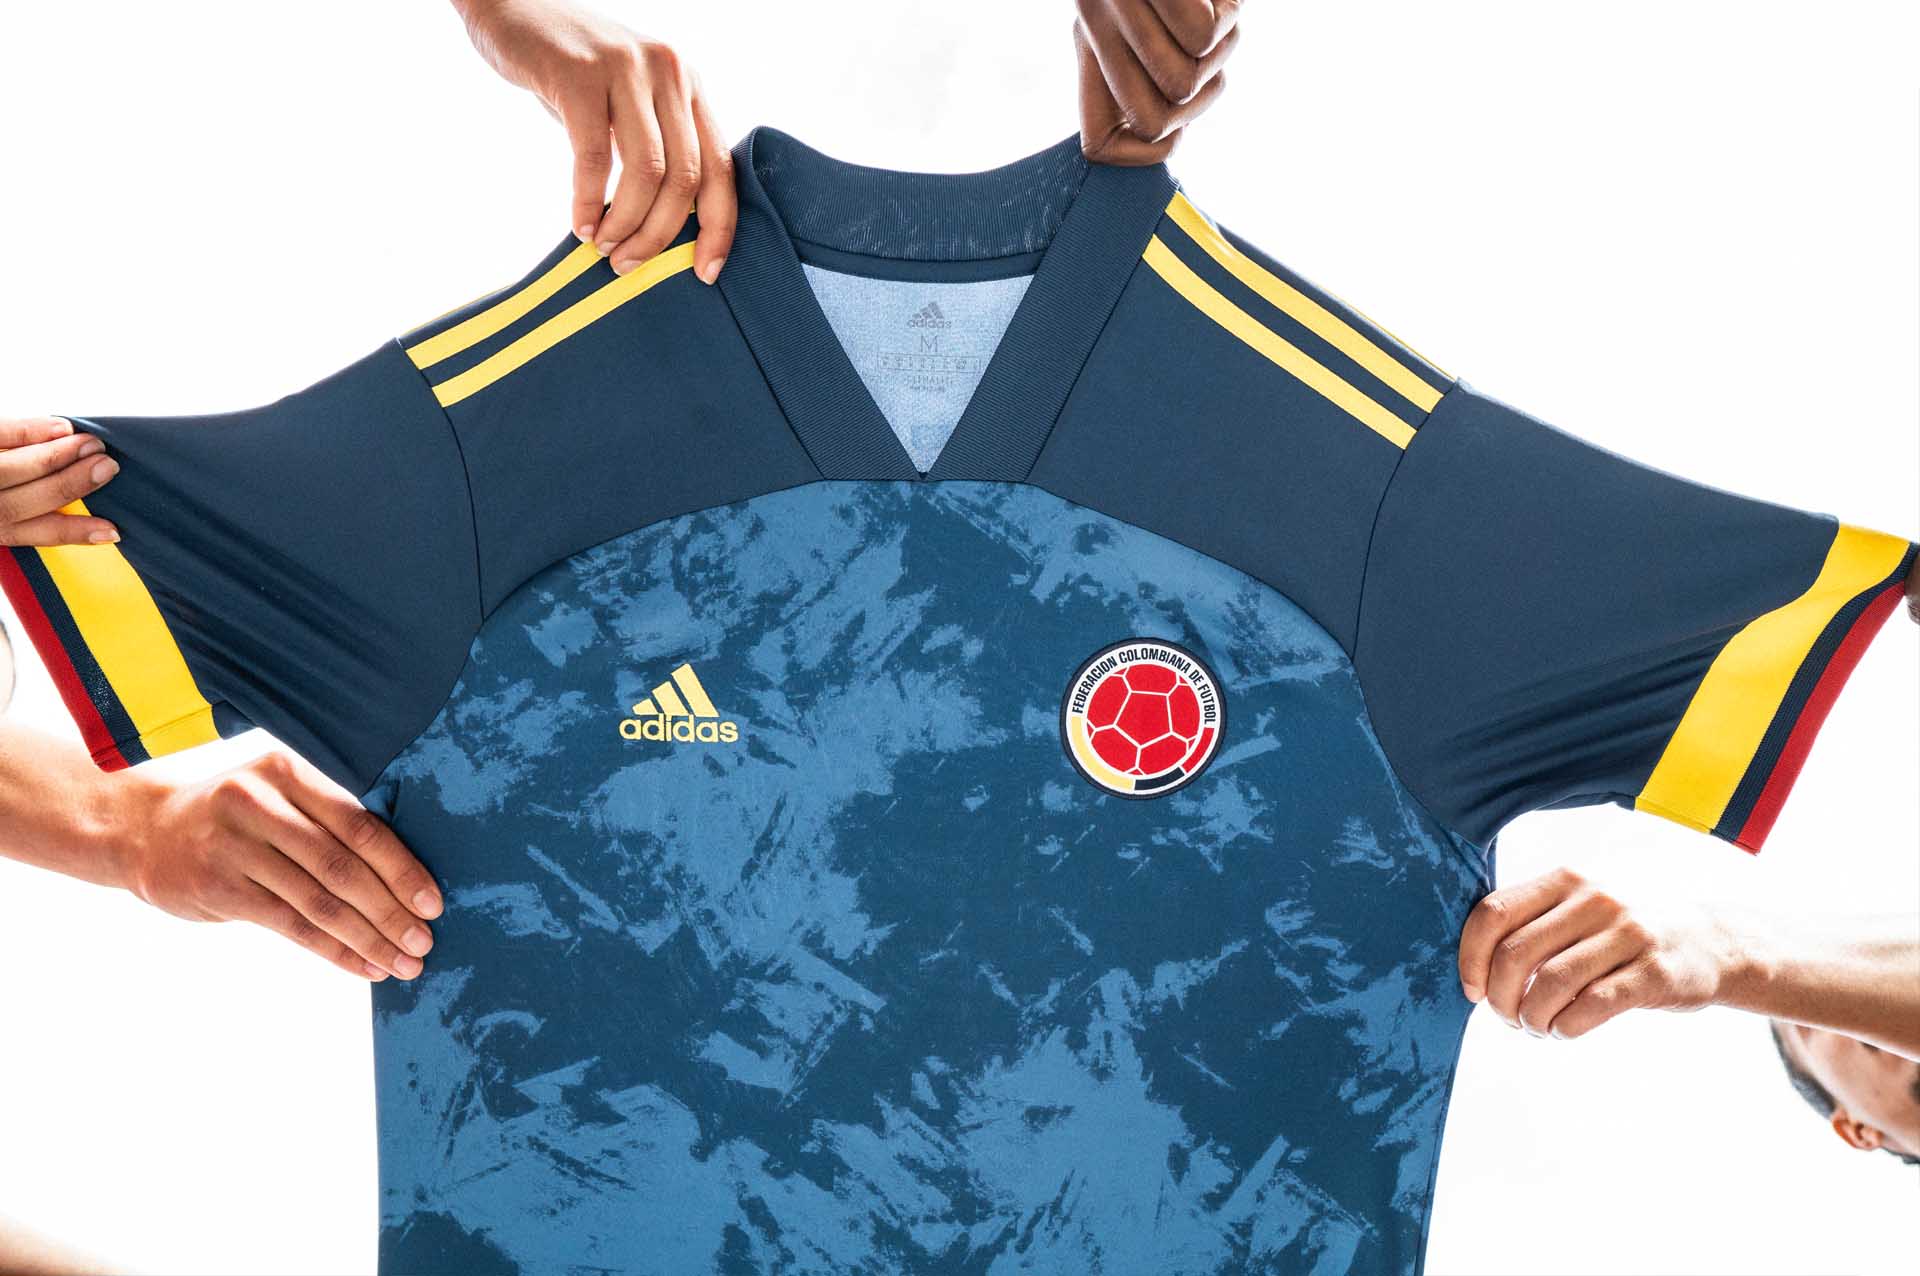 Colombia uitshirt 2020-2021 - Voetbalshirts.com